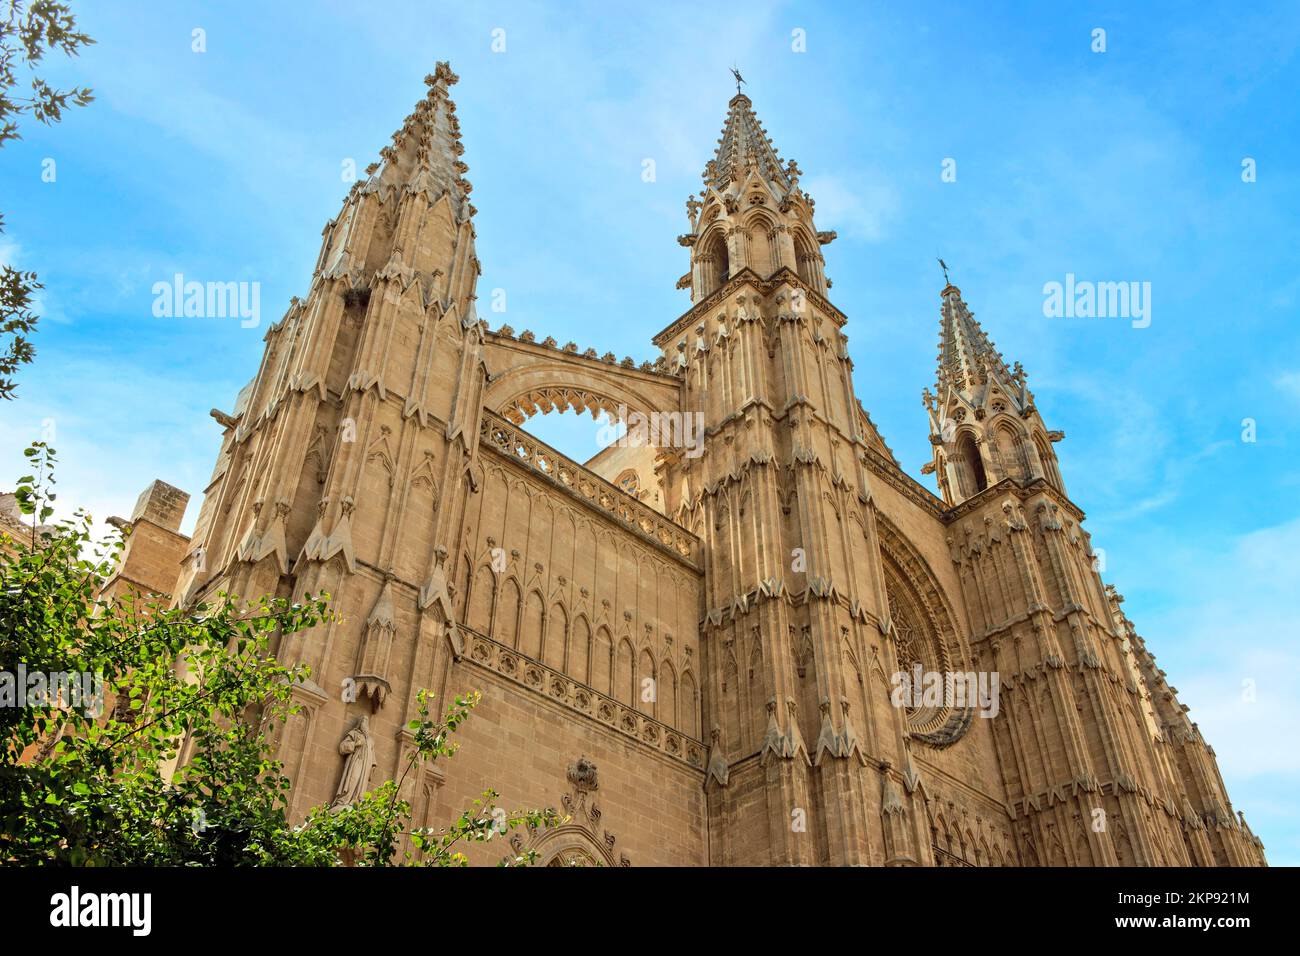 Towers with cross braces for architectural stabilisation lateral dissipation of weight pressure, Cathedral of St. Mary in Gothic architectural style G Stock Photo